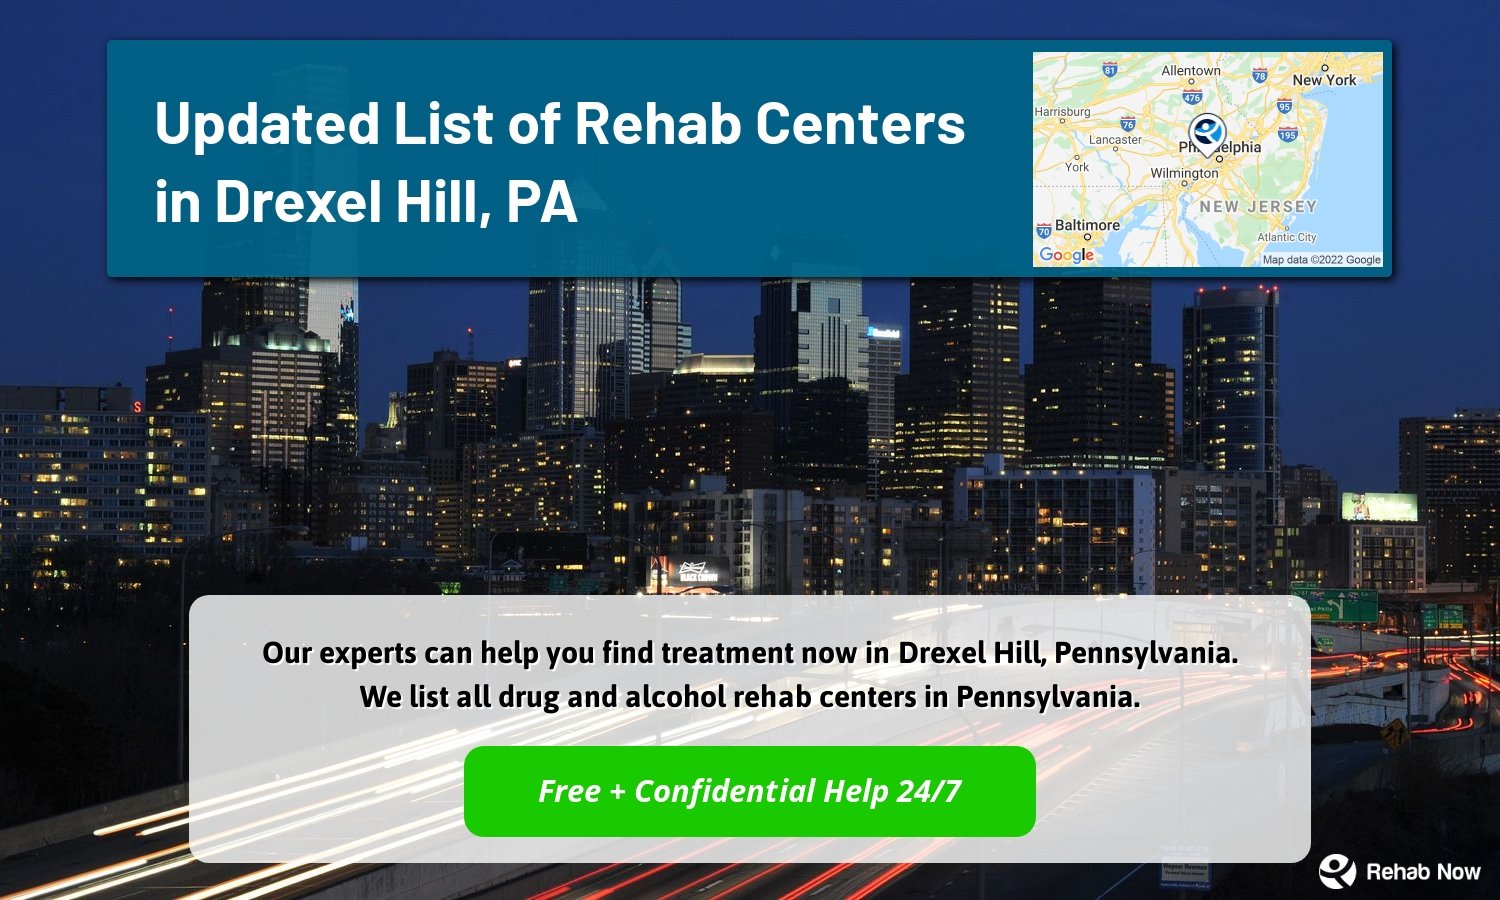 Our experts can help you find treatment now in Drexel Hill, Pennsylvania. We list all drug and alcohol rehab centers in Pennsylvania.